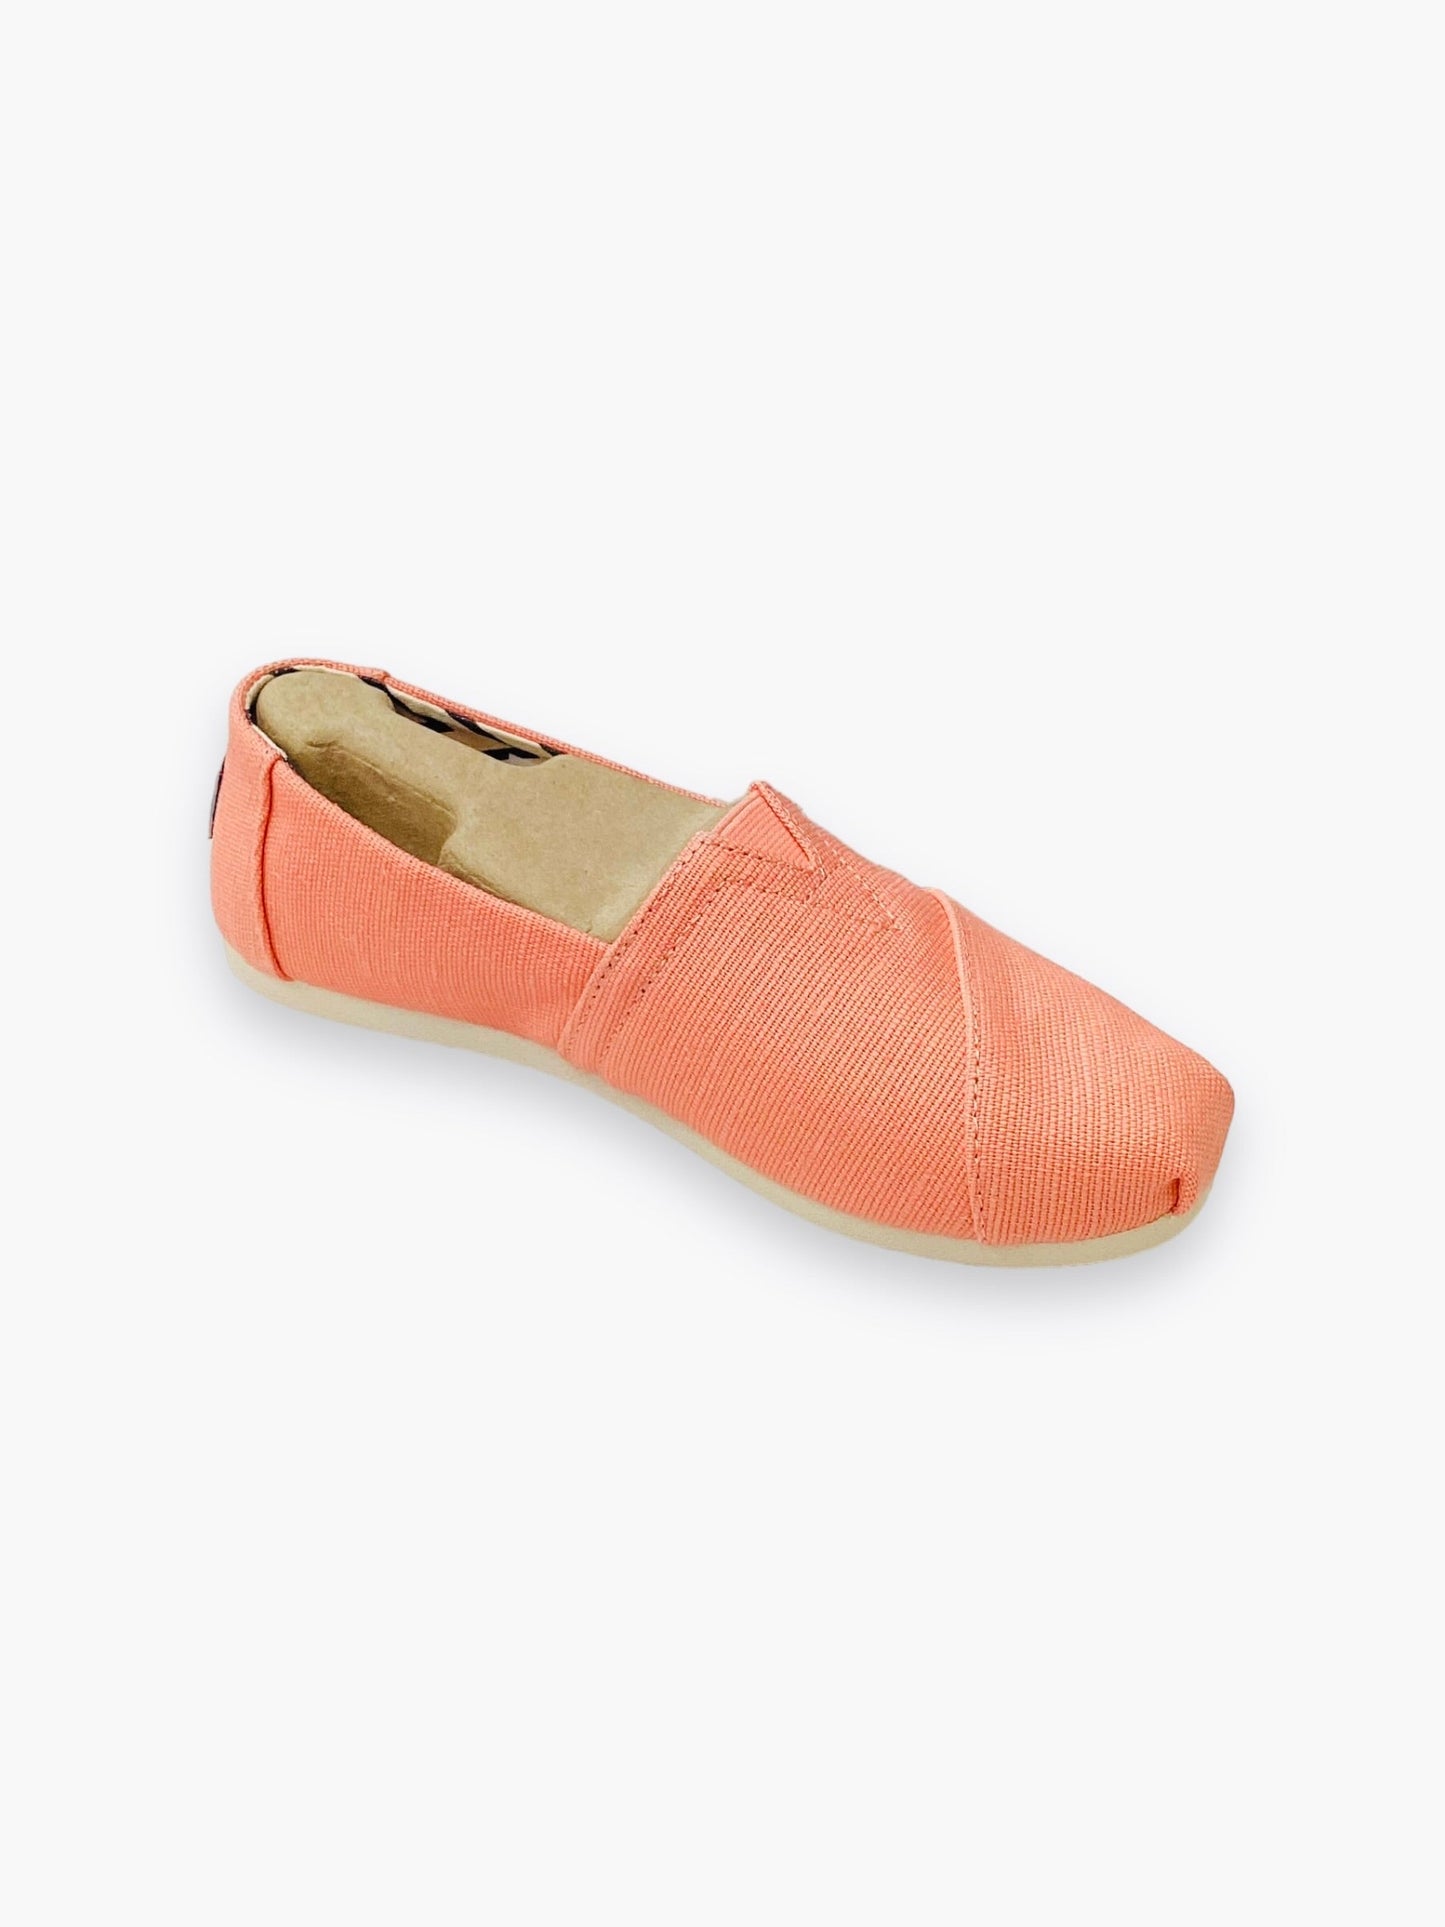 NWT Coral Shoes Flats Toms, Size 6